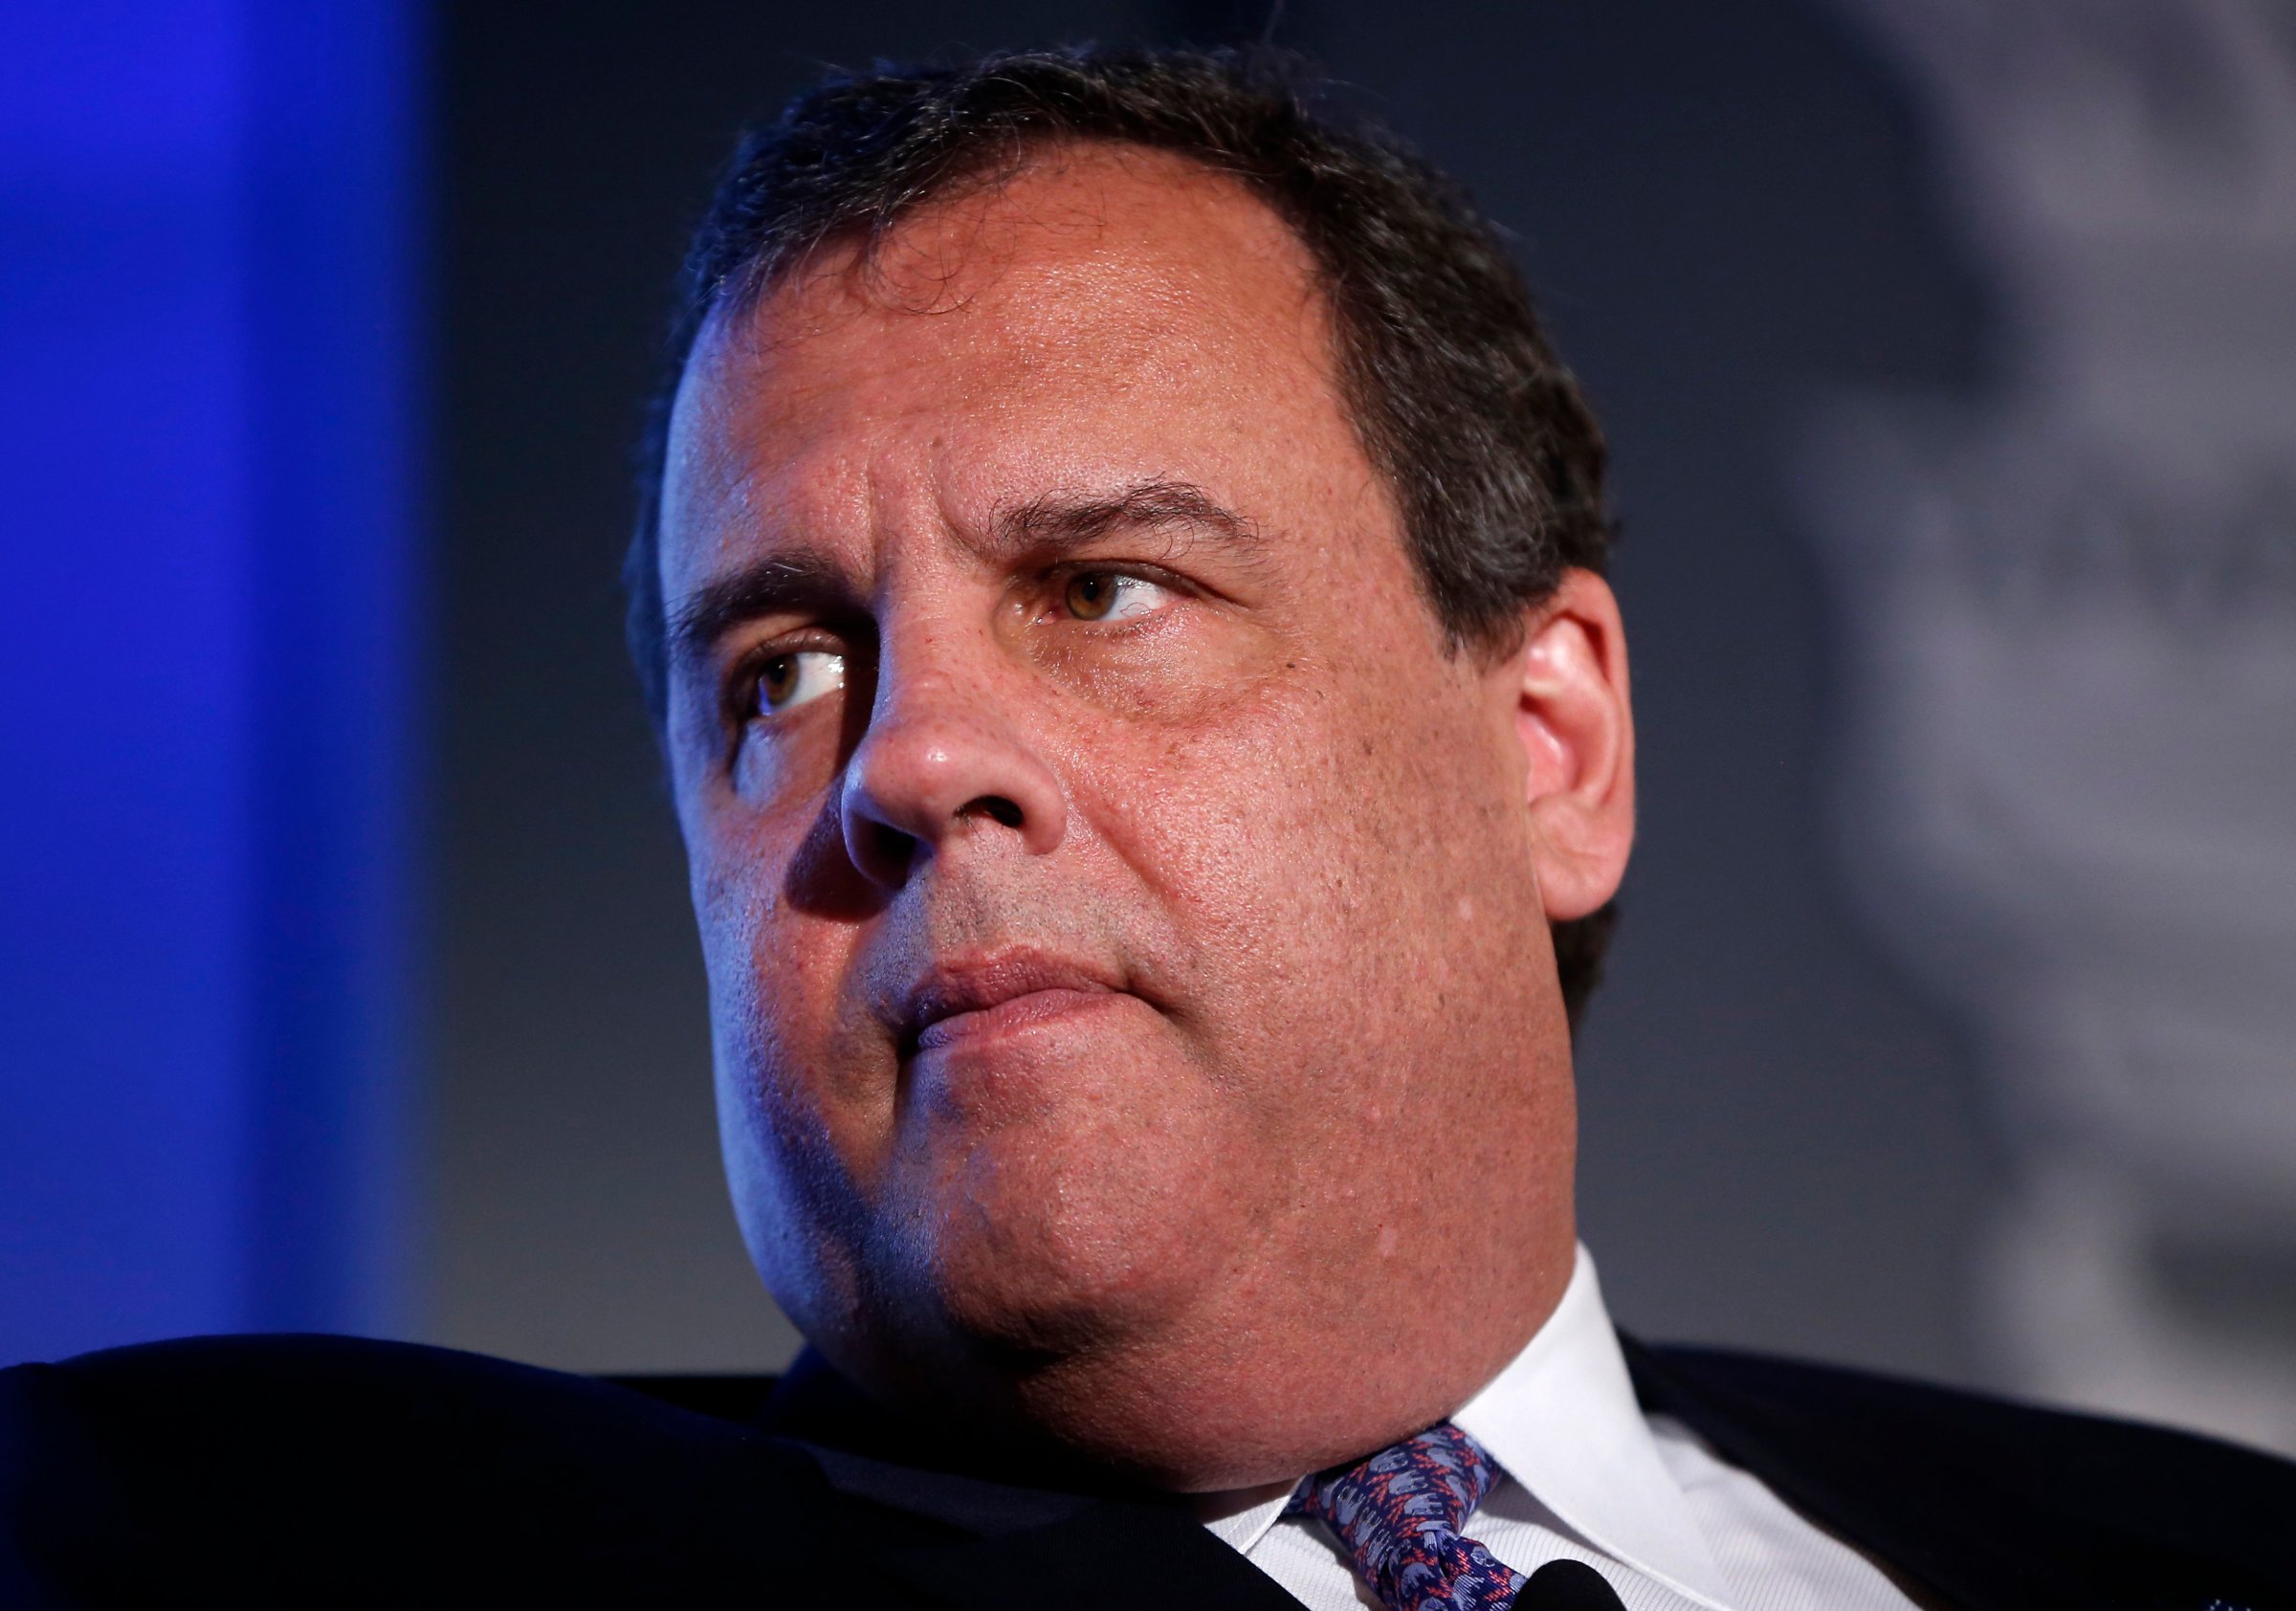 New Jersey Gov. Chris Christie listens to a question from Bob Schieffer of CBS News at the 2014 Fiscal Summit organized by the Peter G. Peterson Foundation in Washington, May 14, 2014.